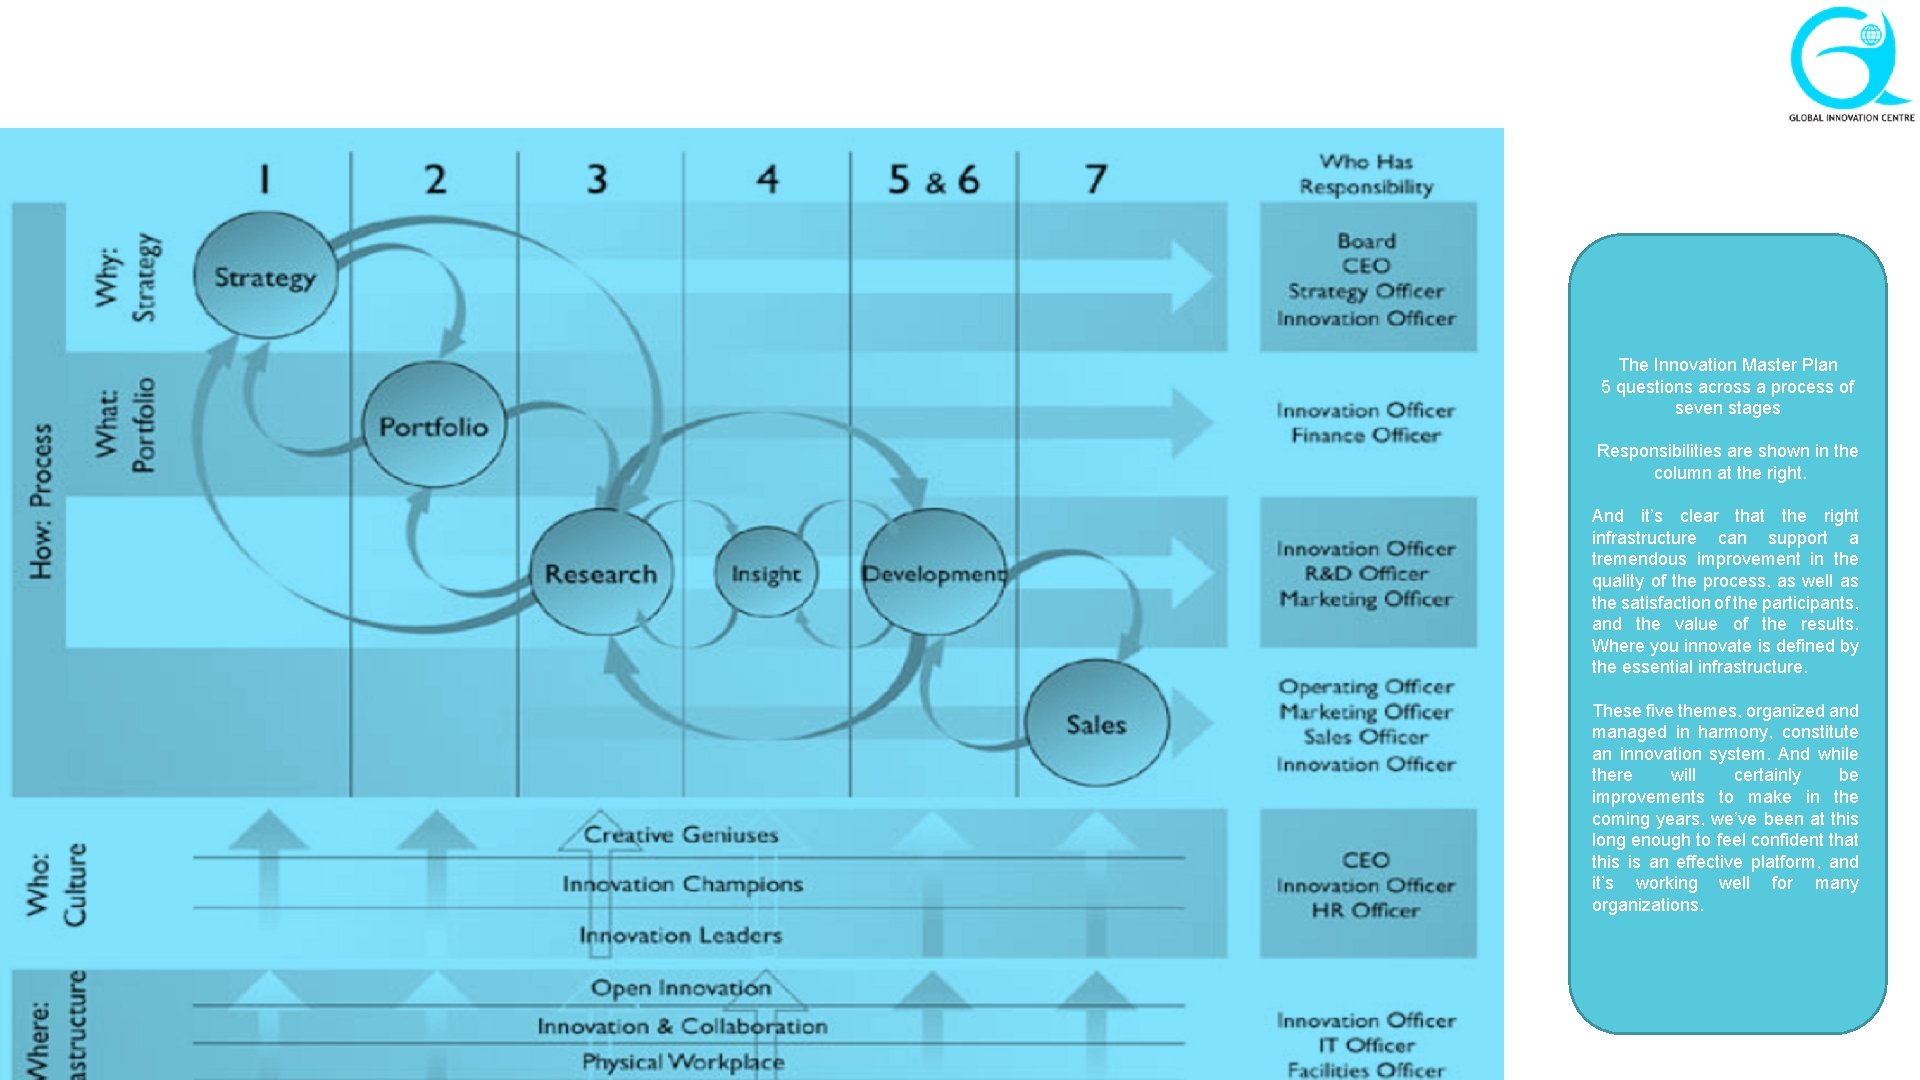 The Innovation Master Plan 5 questions across a process of seven stages Responsibilities are